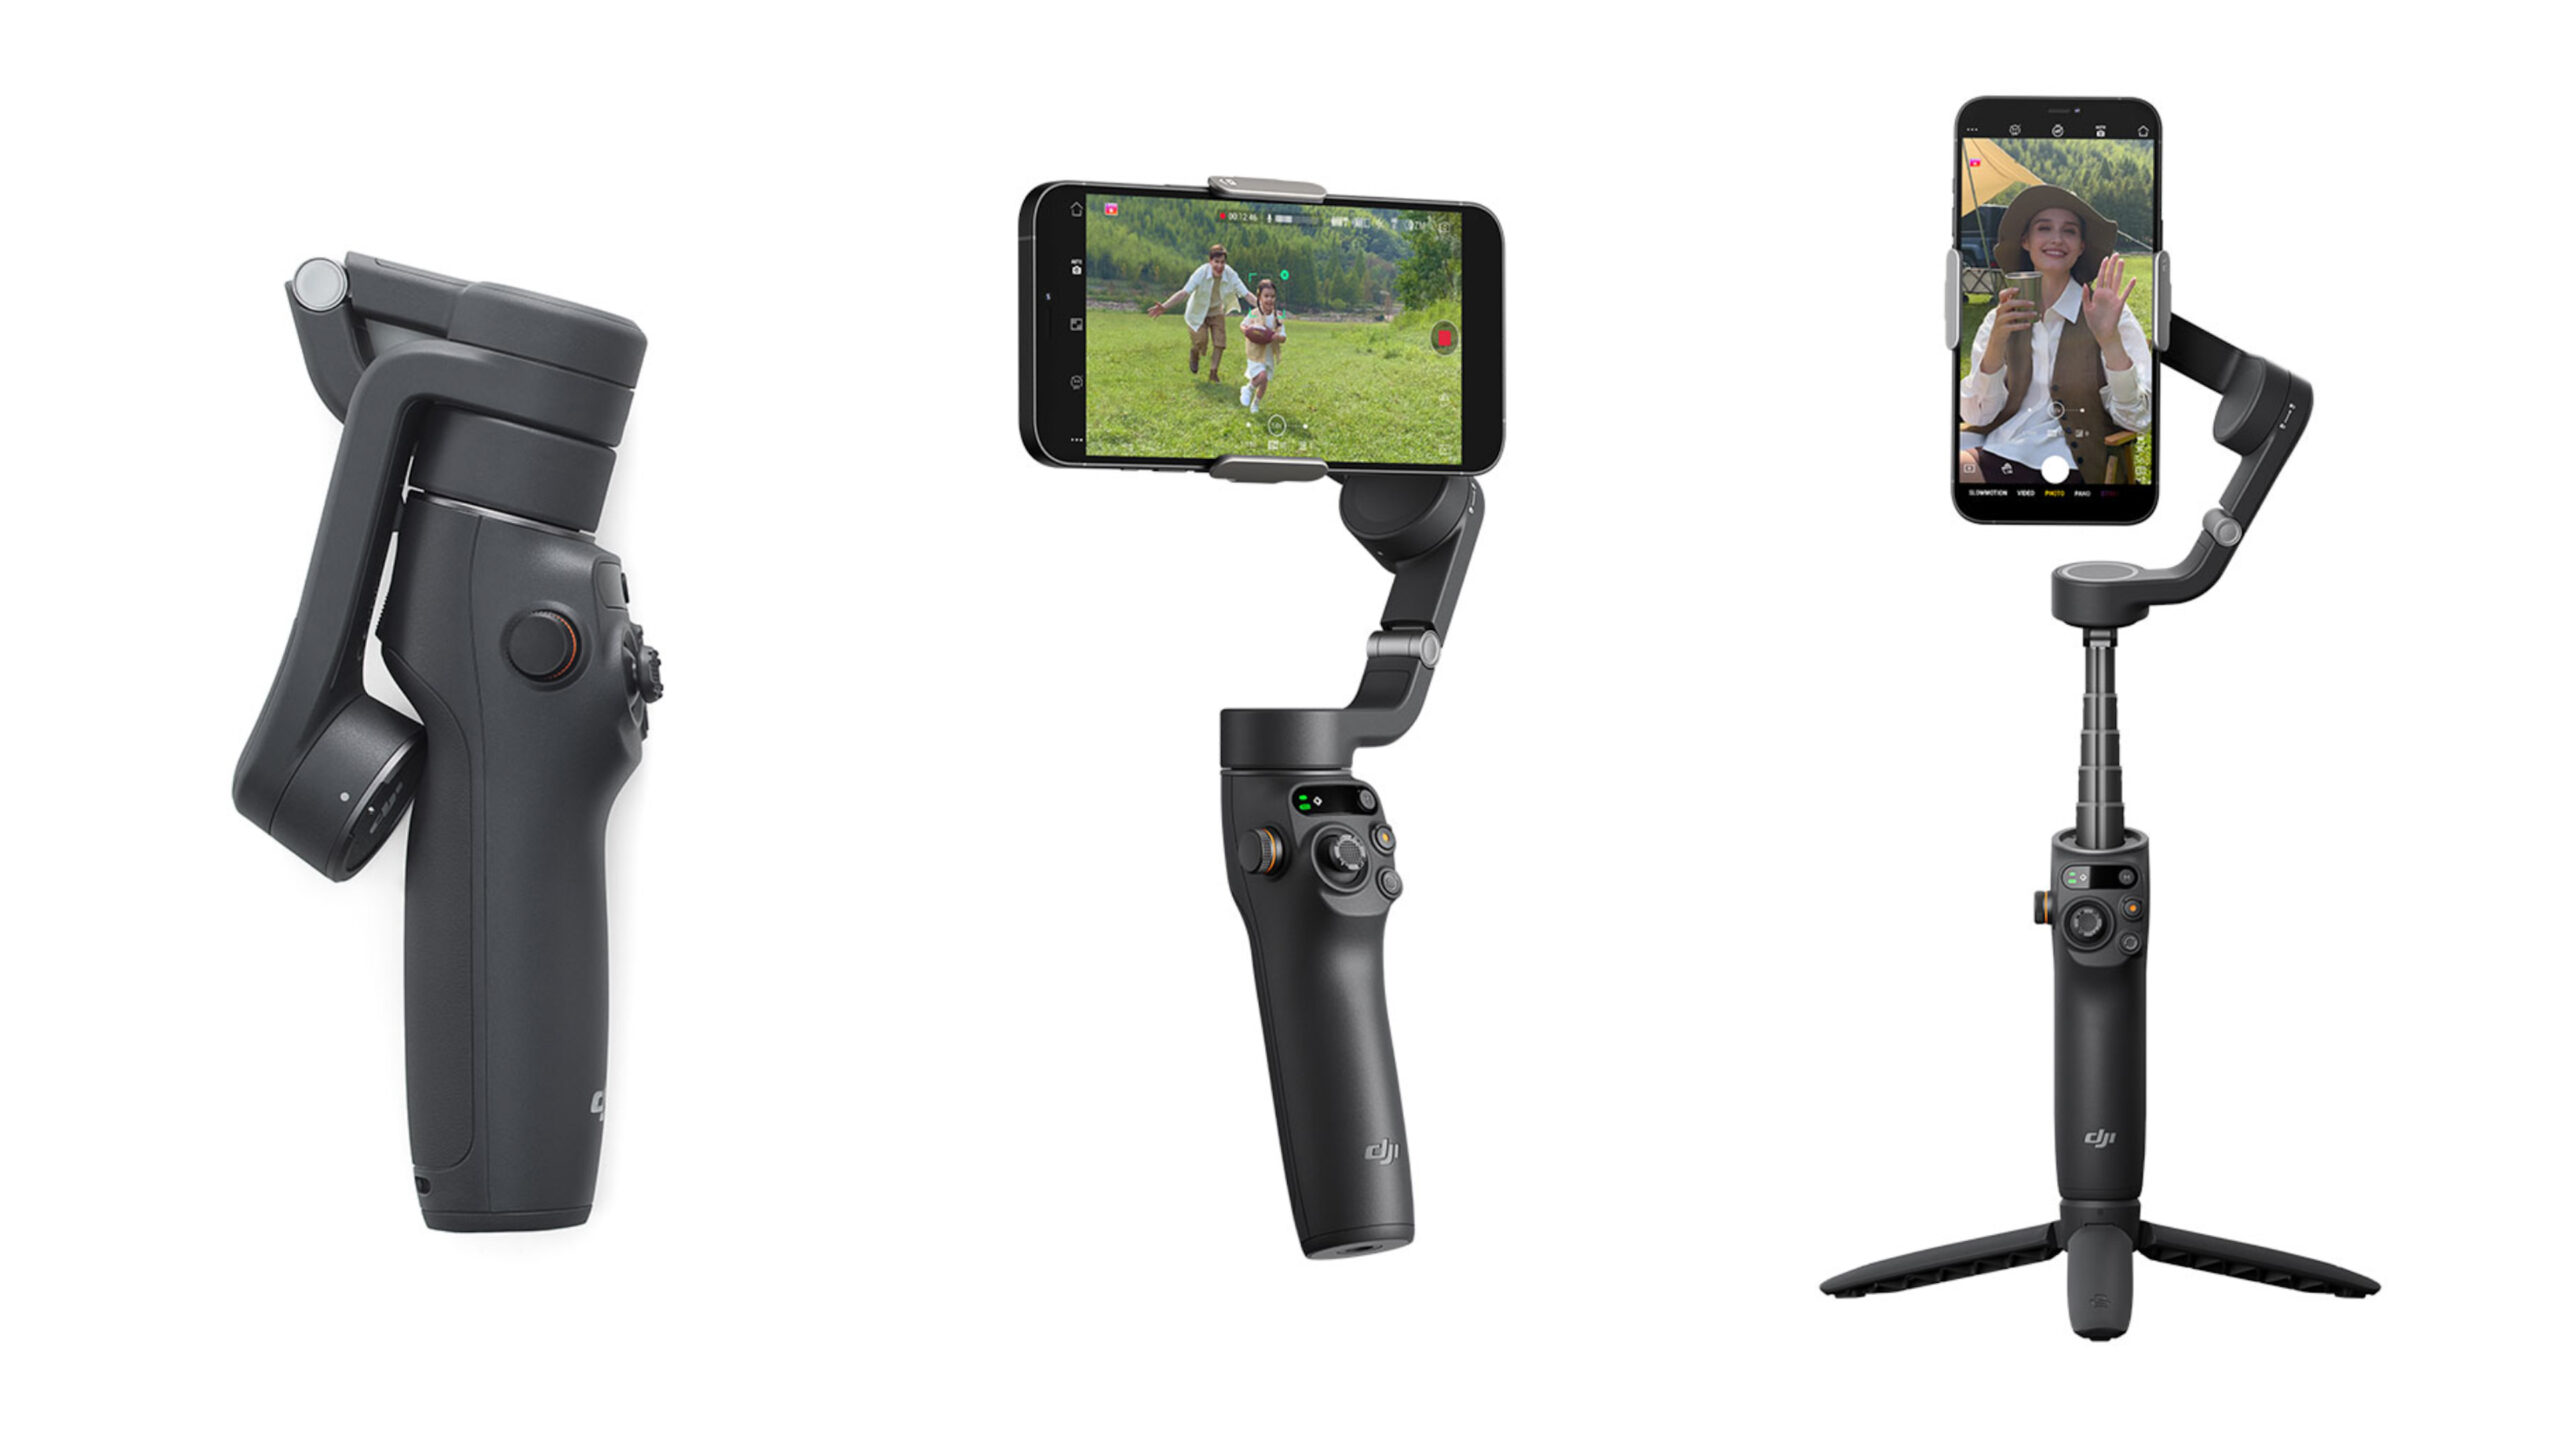 DJI Osmo Mobile 6 Introduced - A New Generation of Smartphone 